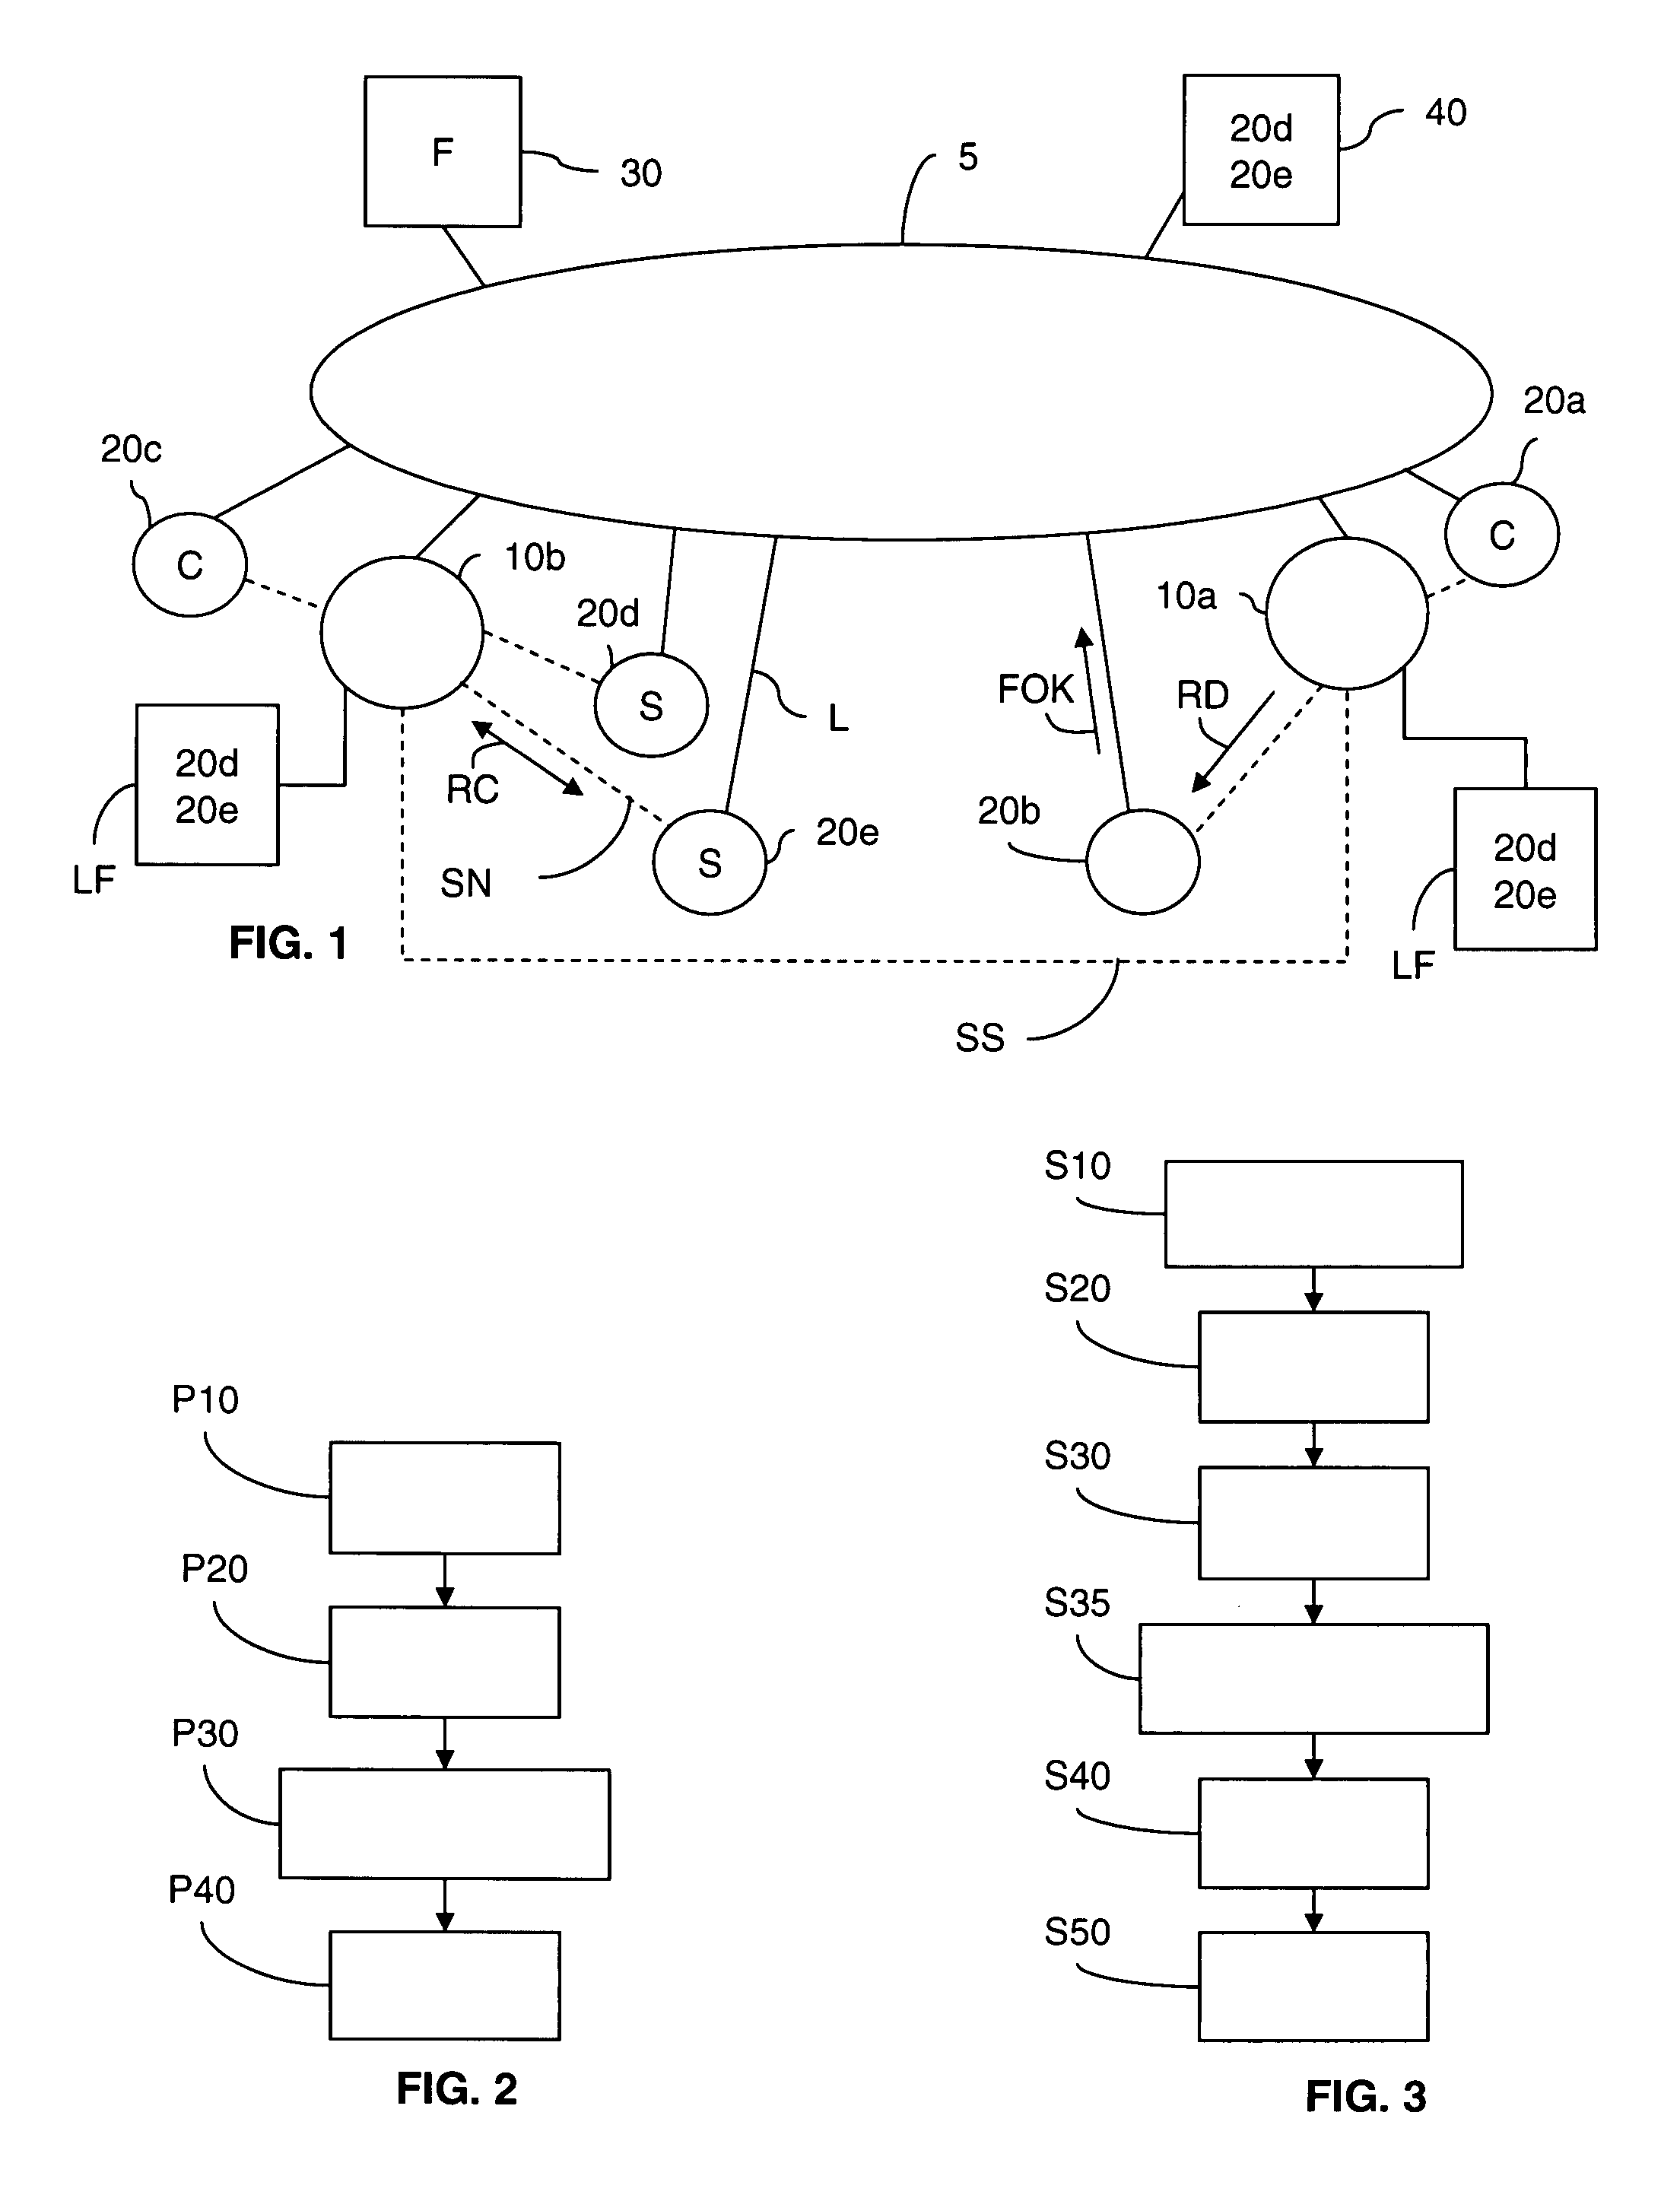 System and method for establishment of a client/server type relationship in a peer-to-peer network